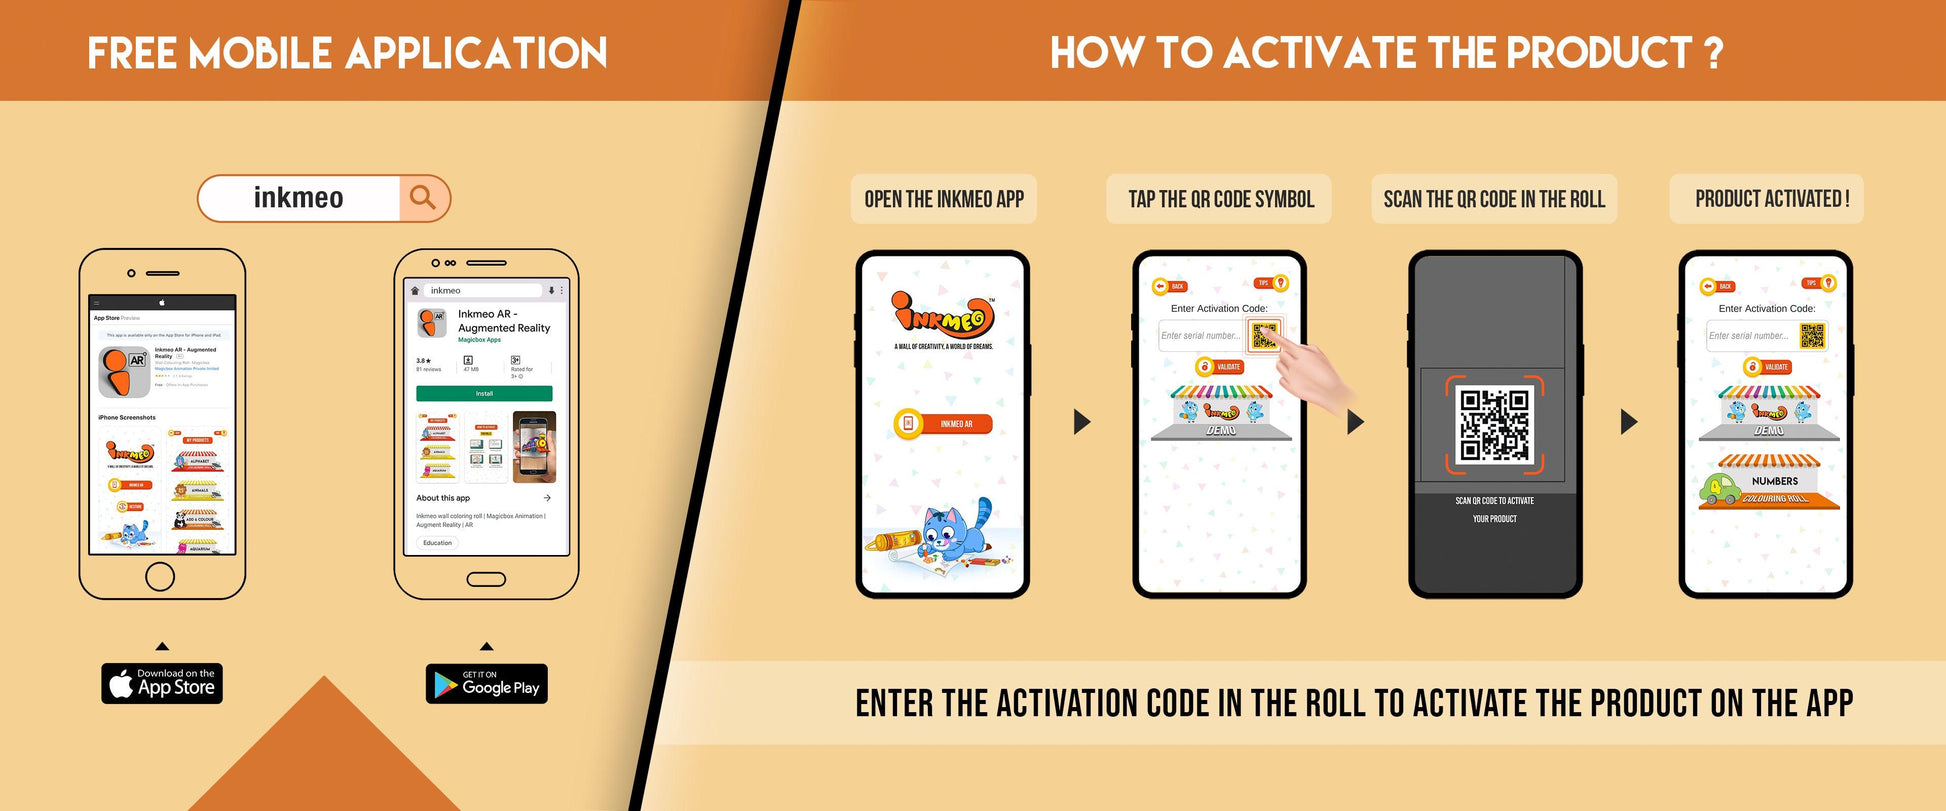 The image features an orange background split into two sections. The first showcases a free mobile app to download Inkmeo from the App Store and Google Store. The second displays four phones with the text "To access the Inkmeo app, tap the QR code icon, scan the QR code on the package, and activate the product."